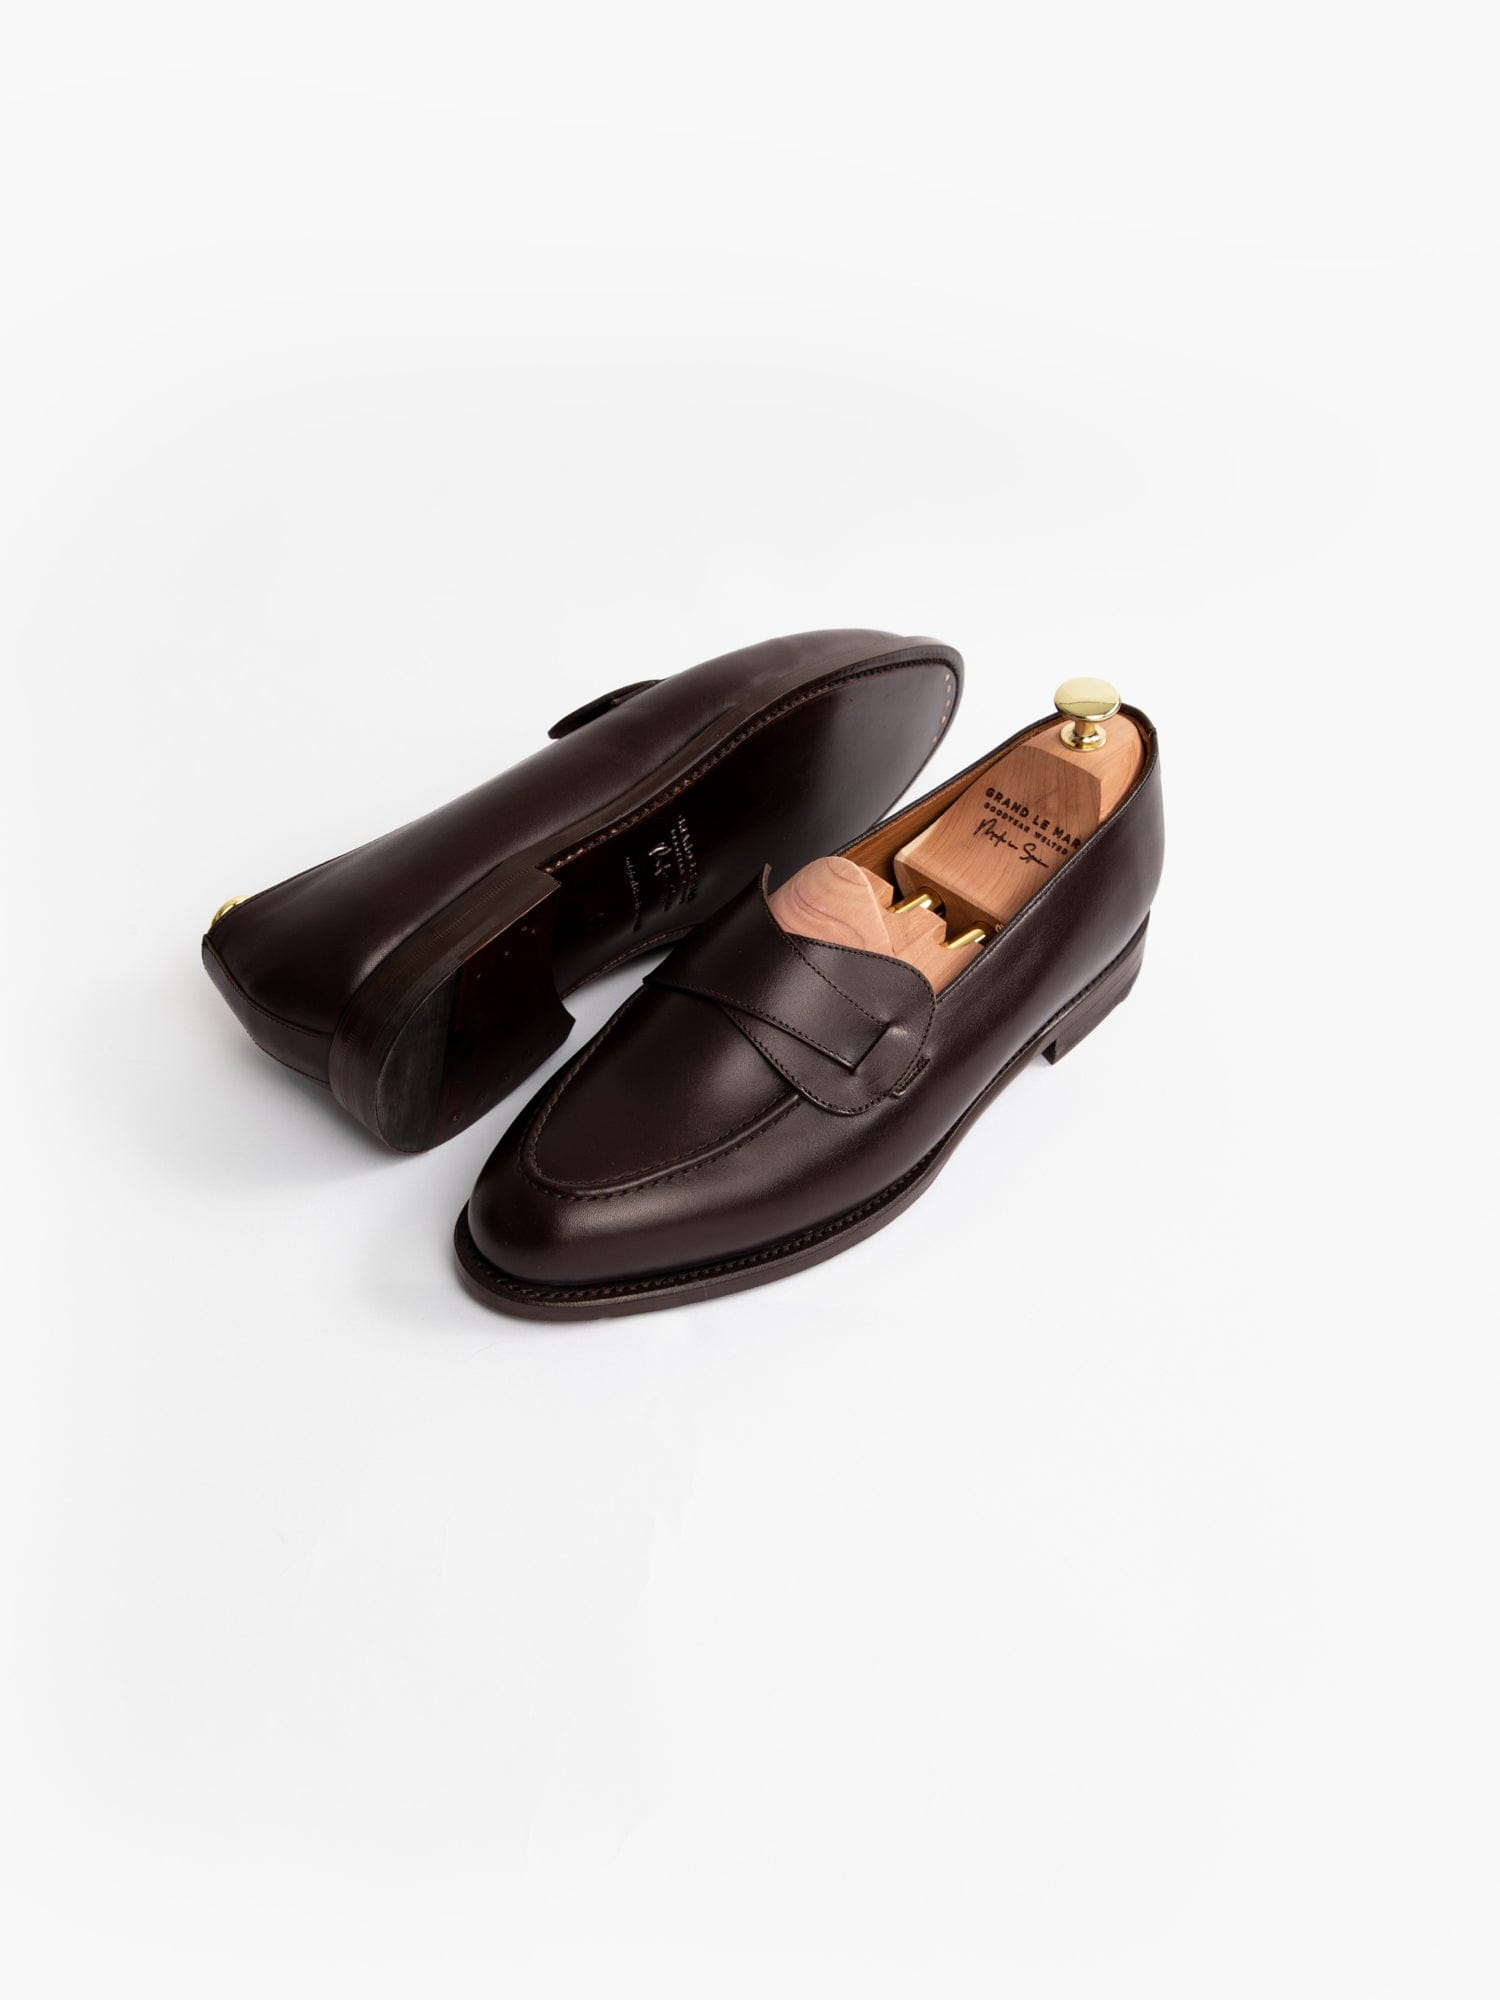 Butterfly Loafers Brown Calf Leather - Grand Le Mar